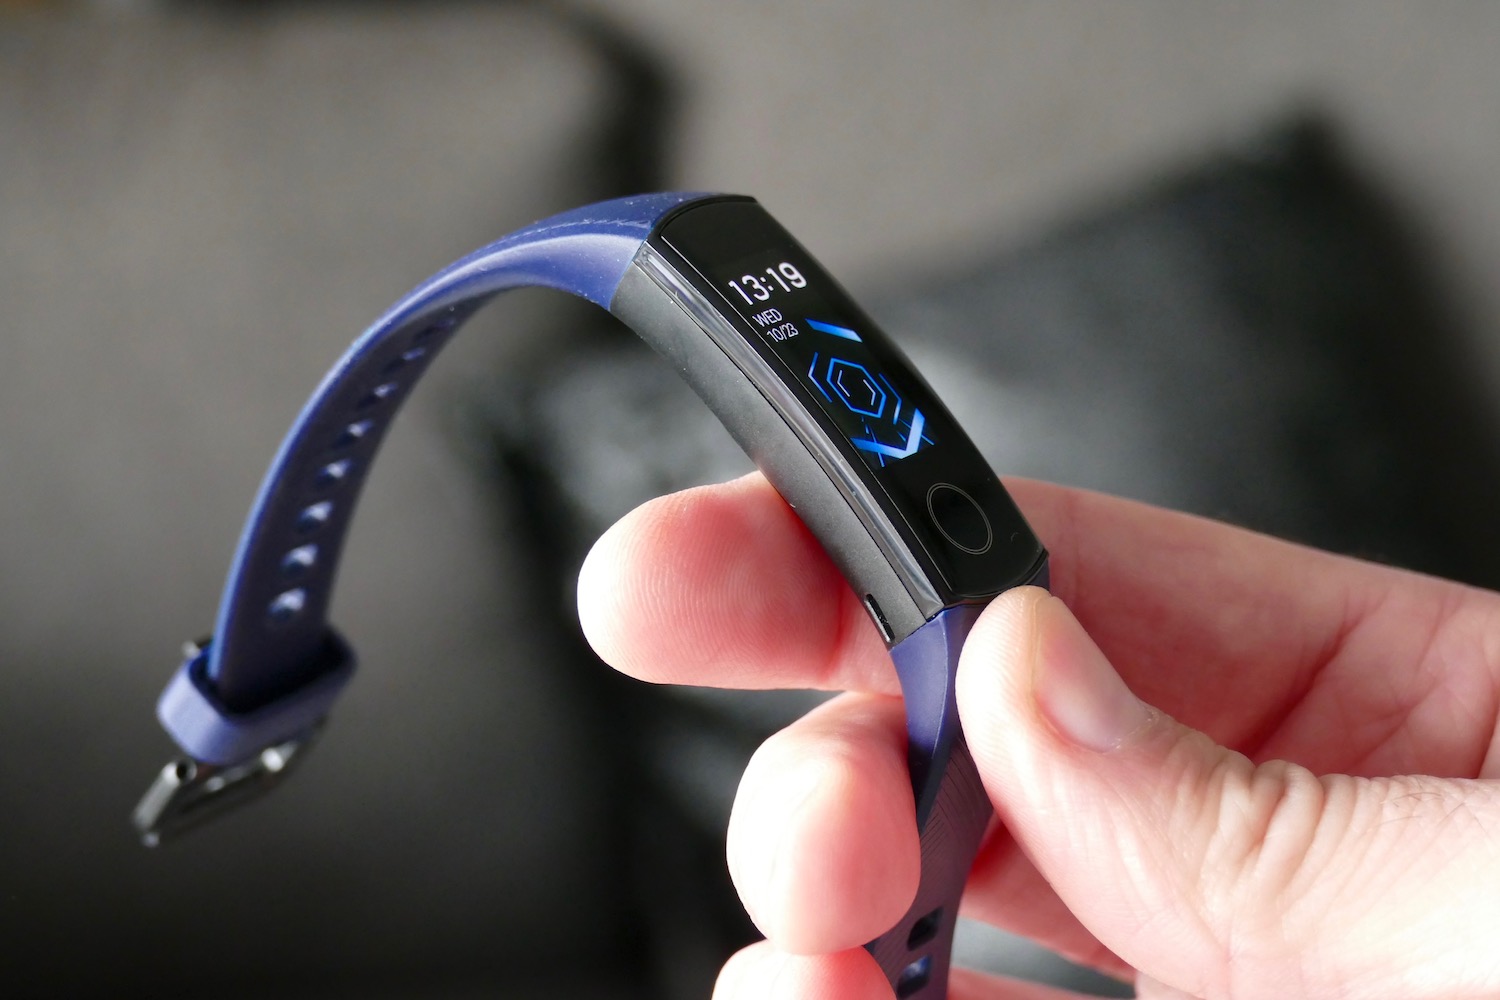 Honor Band 5 review – A decent fitness tracker 